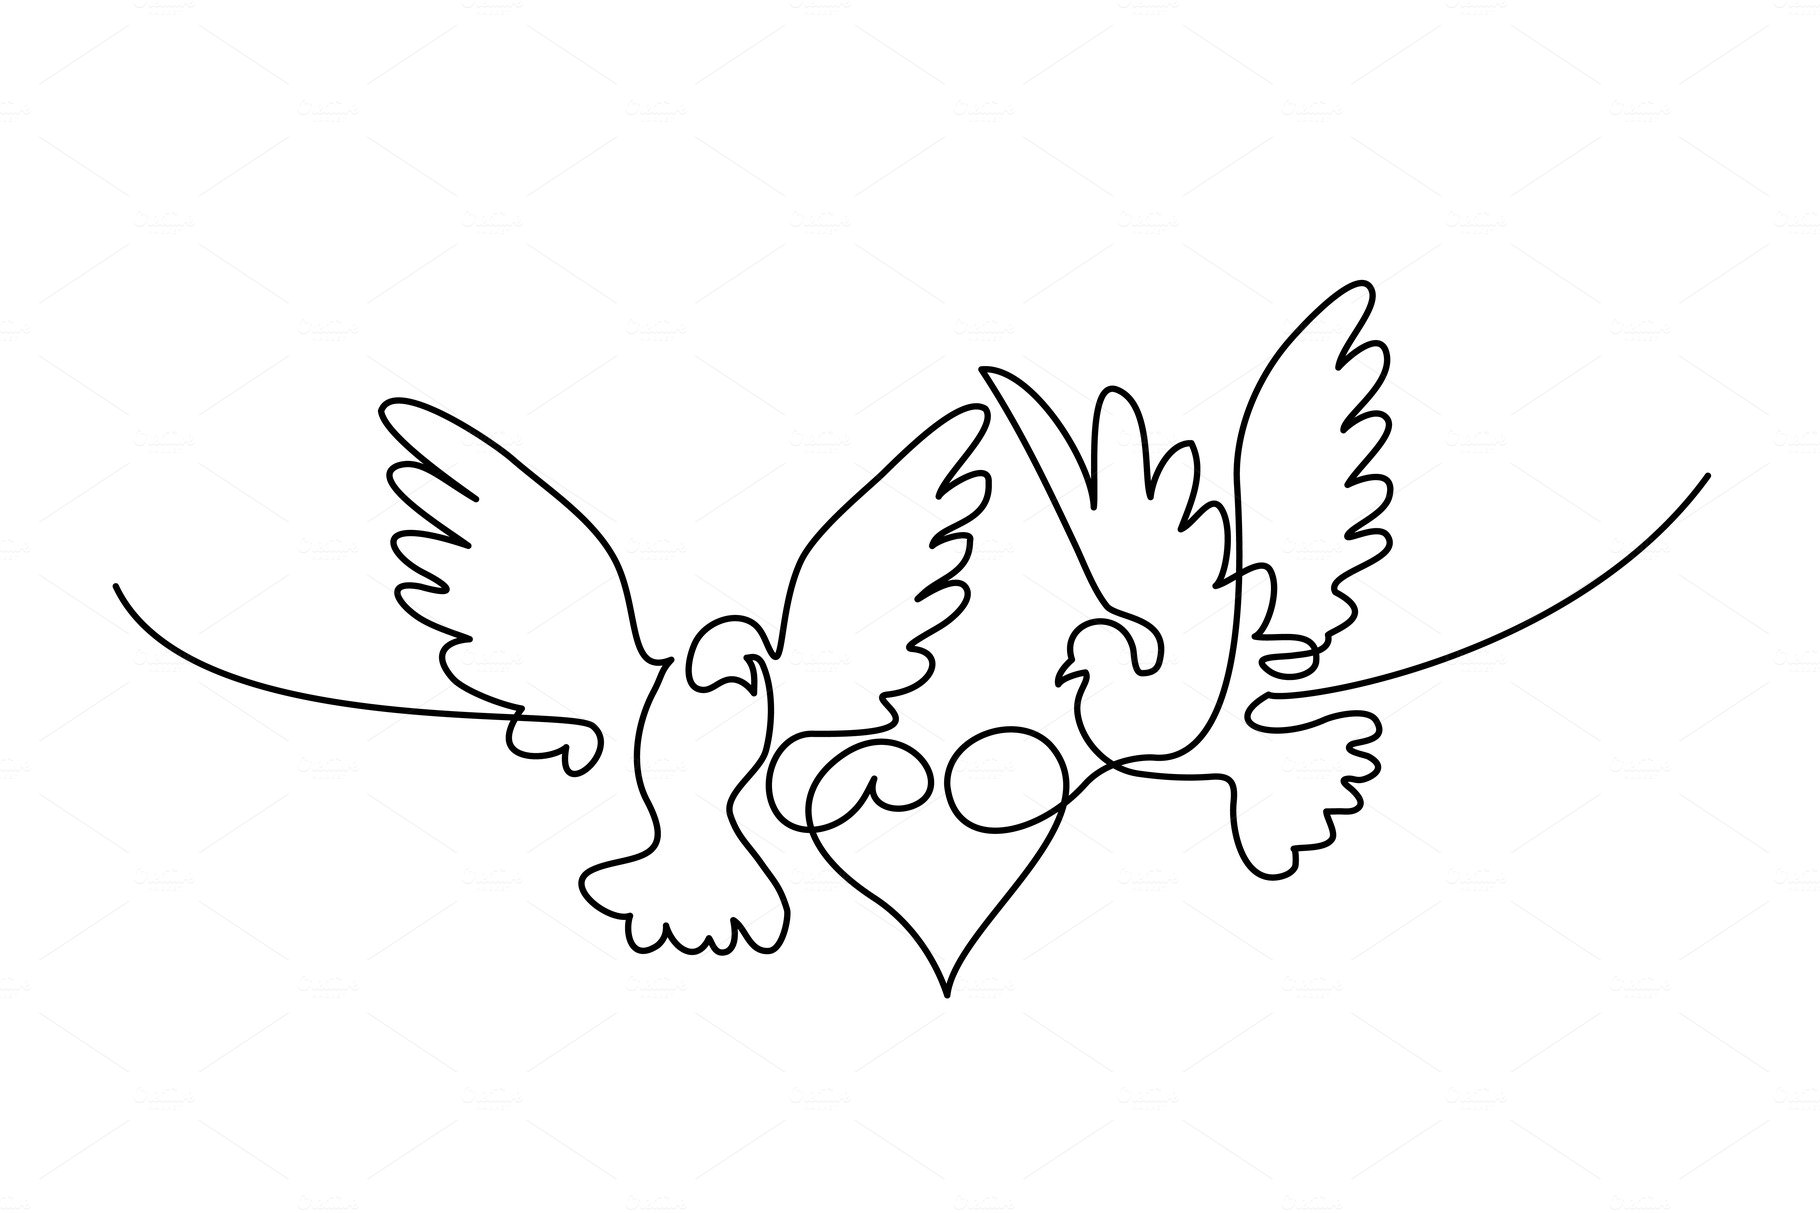 Flying two pigeons with heart logo cover image.